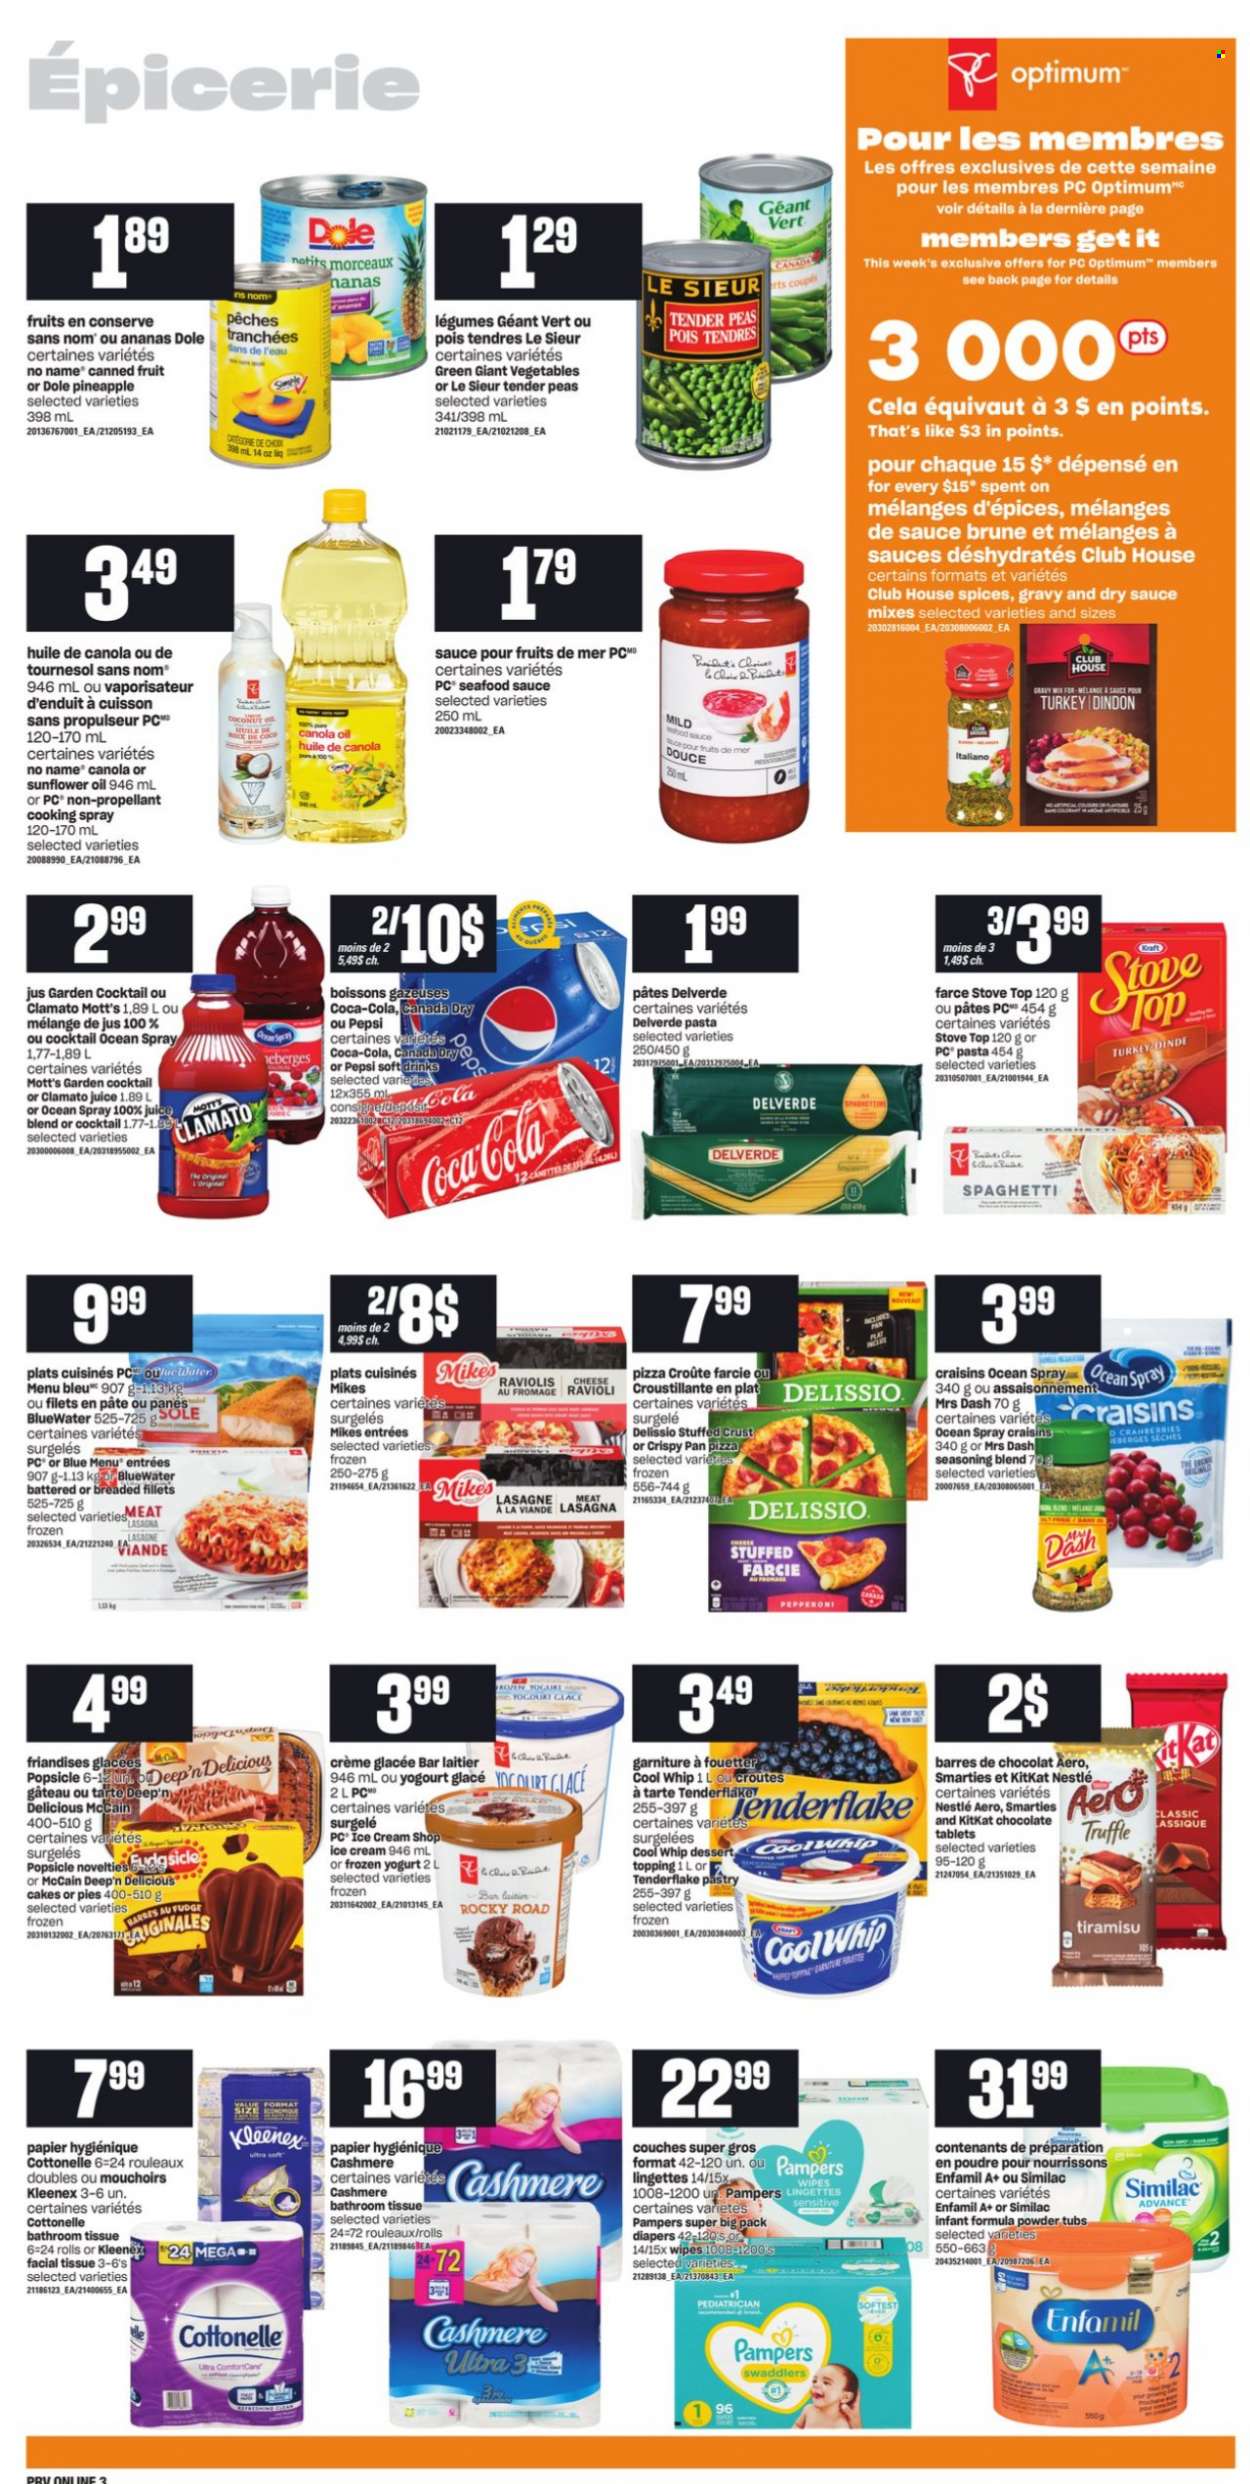 thumbnail - Provigo Flyer - October 07, 2021 - October 13, 2021 - Sales products - cake, tiramisu, peas, Dole, pineapple, coconut, Mott's, seafood, No Name, ravioli, spaghetti, pizza, pasta, lasagna meal, Kraft®, pepperoni, yoghurt, Cool Whip, ice cream, McCain, fudge, truffles, KitKat, topping, craisins, cranberries, canned fruit, spice, canola oil, cooking spray, sunflower oil, oil, dried fruit, Canada Dry, Coca-Cola, Pepsi, juice, Clamato, soft drink, Enfamil, Similac, wipes, nappies, bath tissue, Cottonelle, Kleenex, Nestlé, Pampers, Smarties. Page 9.